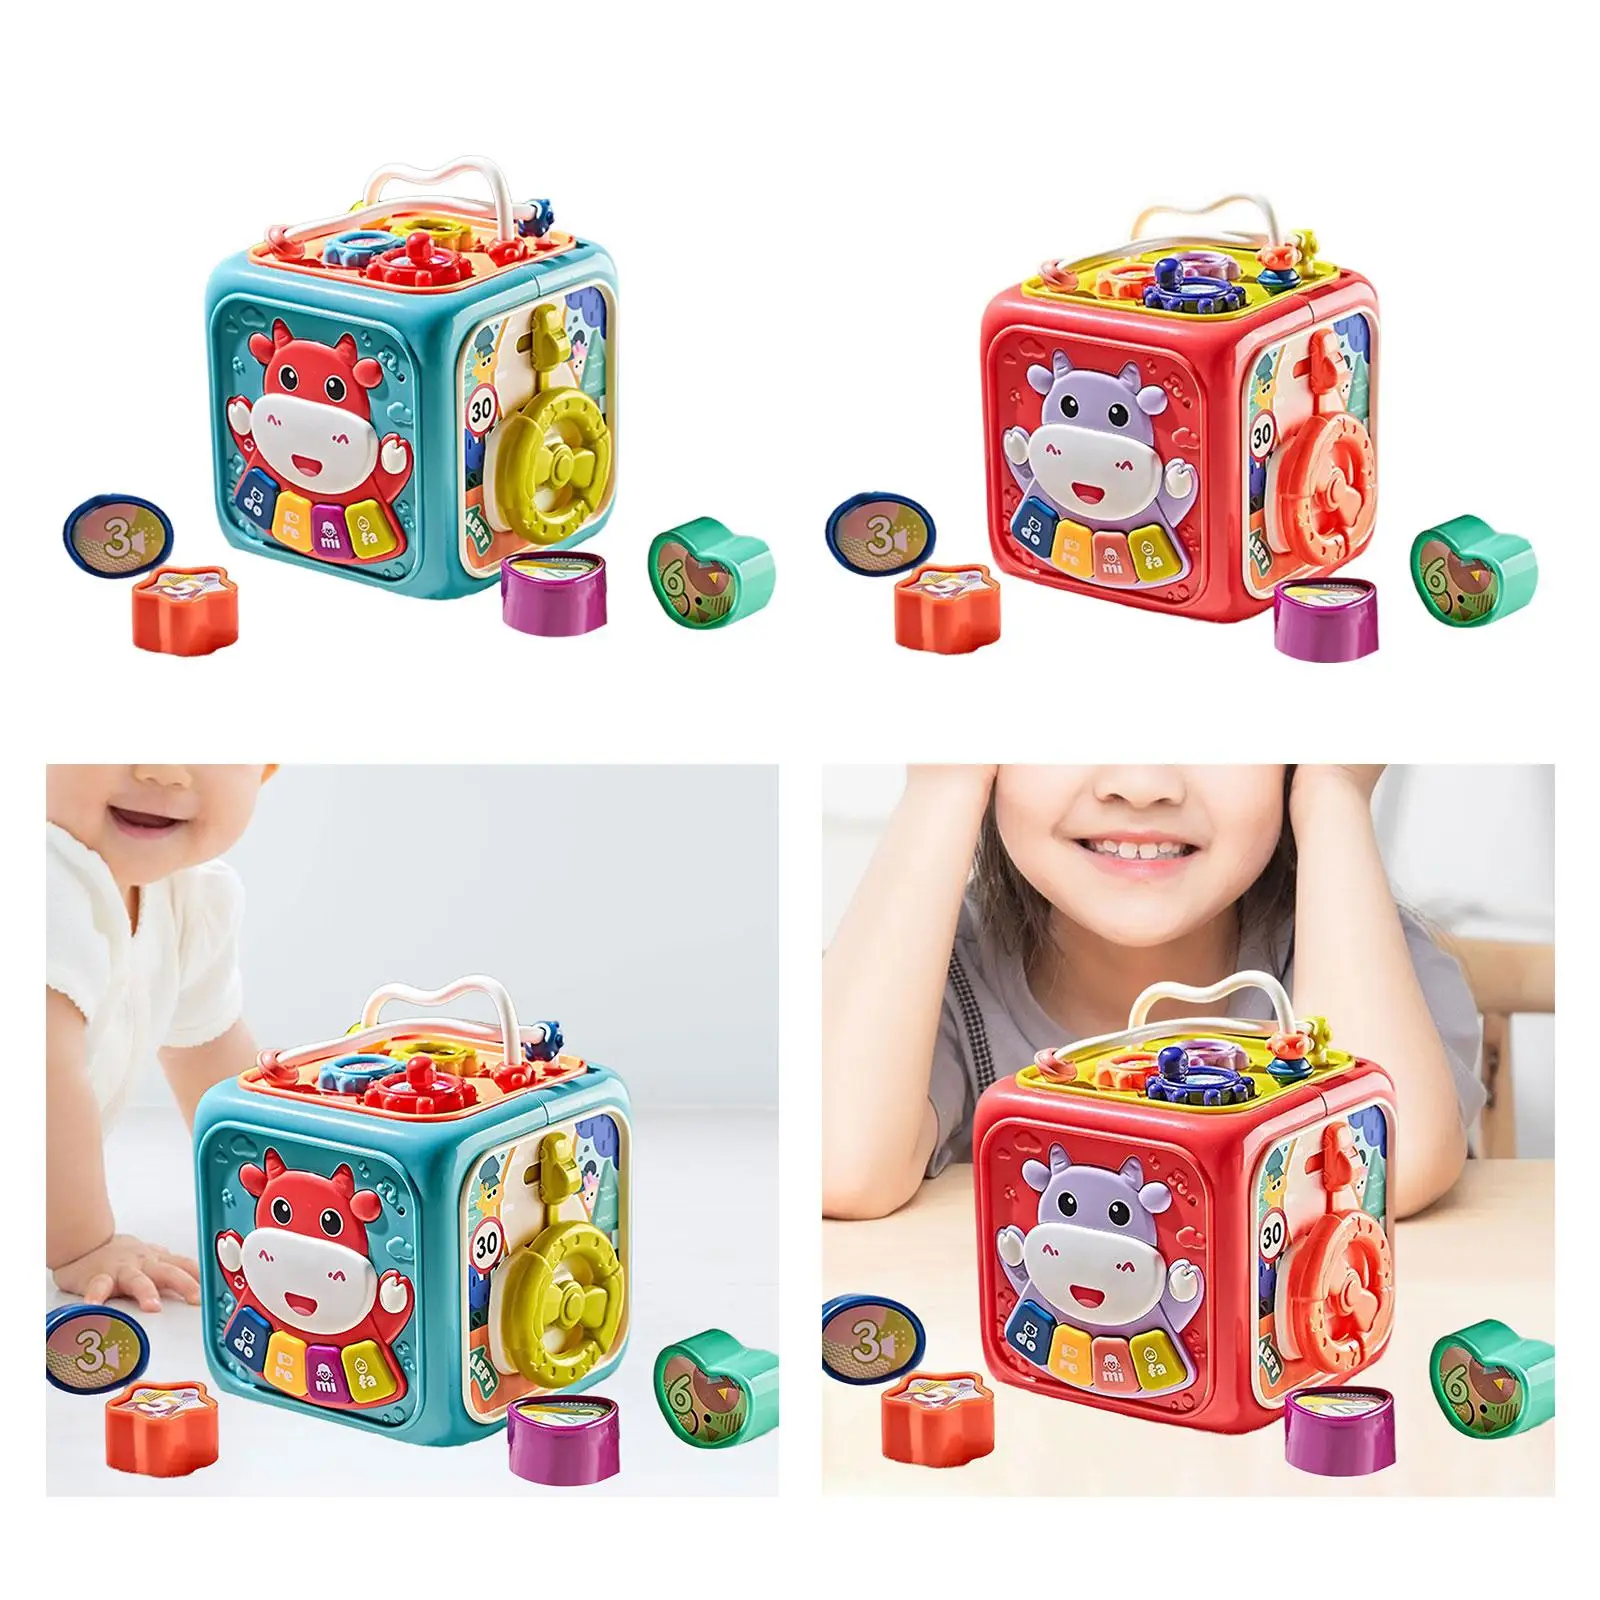 

Creativity Children Puzzle Cube Cognitive Things Baby Musical Educational Learning Parent-child Musical Toys Gift